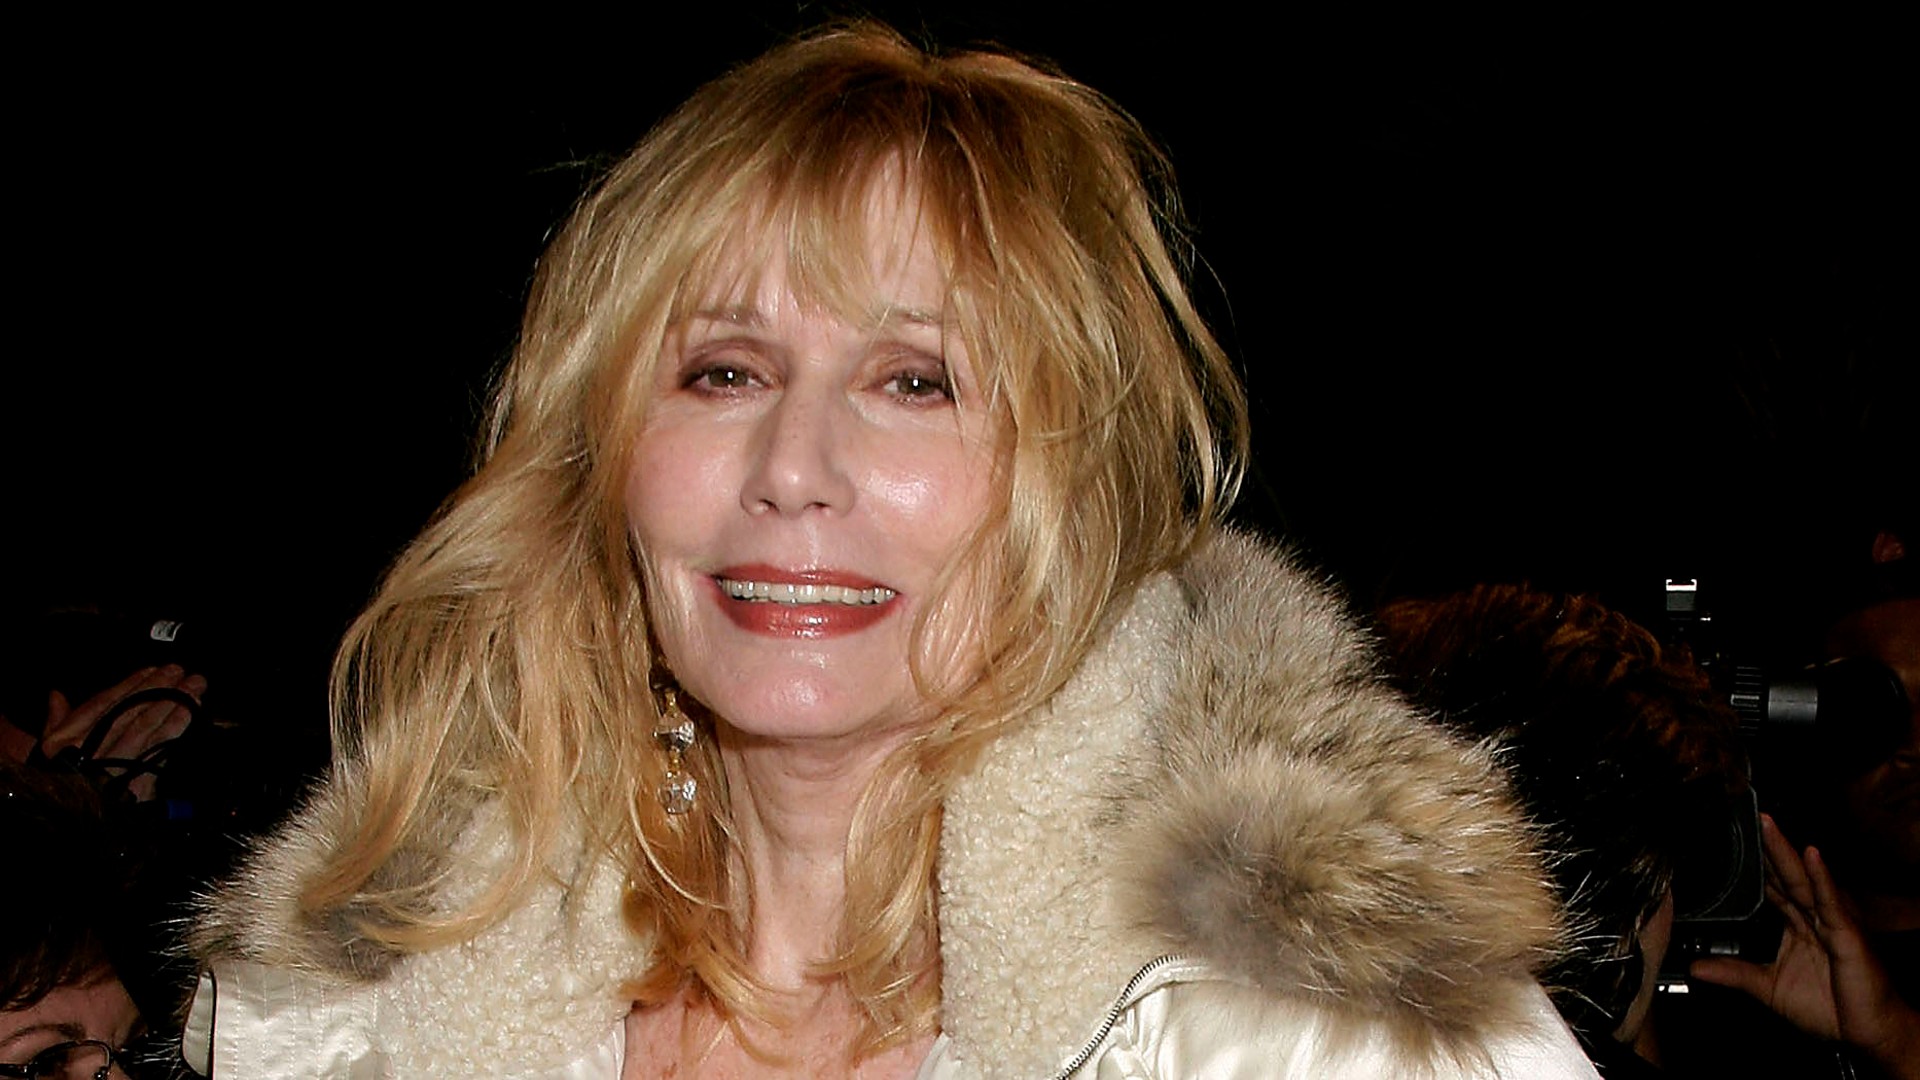 'M*A*S*H' Actress Sally Kellerman Has Died at Age 84